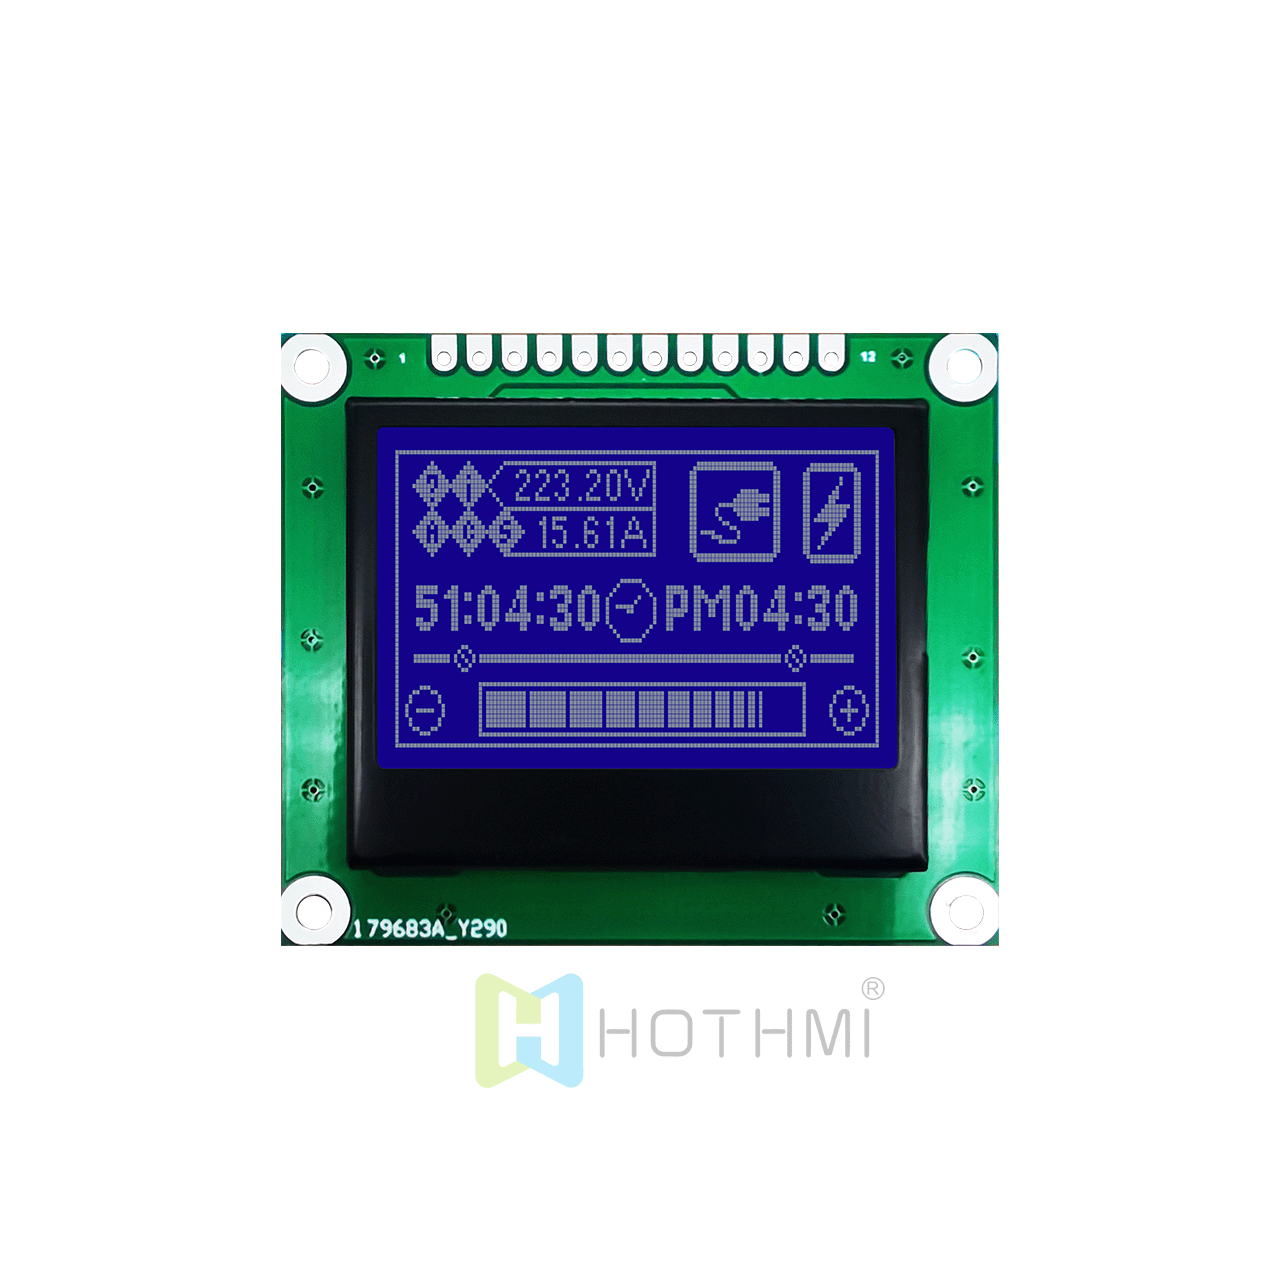 1.7 inch Graphic LCD 128x64 LCD | SPI interface | Graphic module display | STN negative display | Fully transparent polarizer | Blue background with white characters